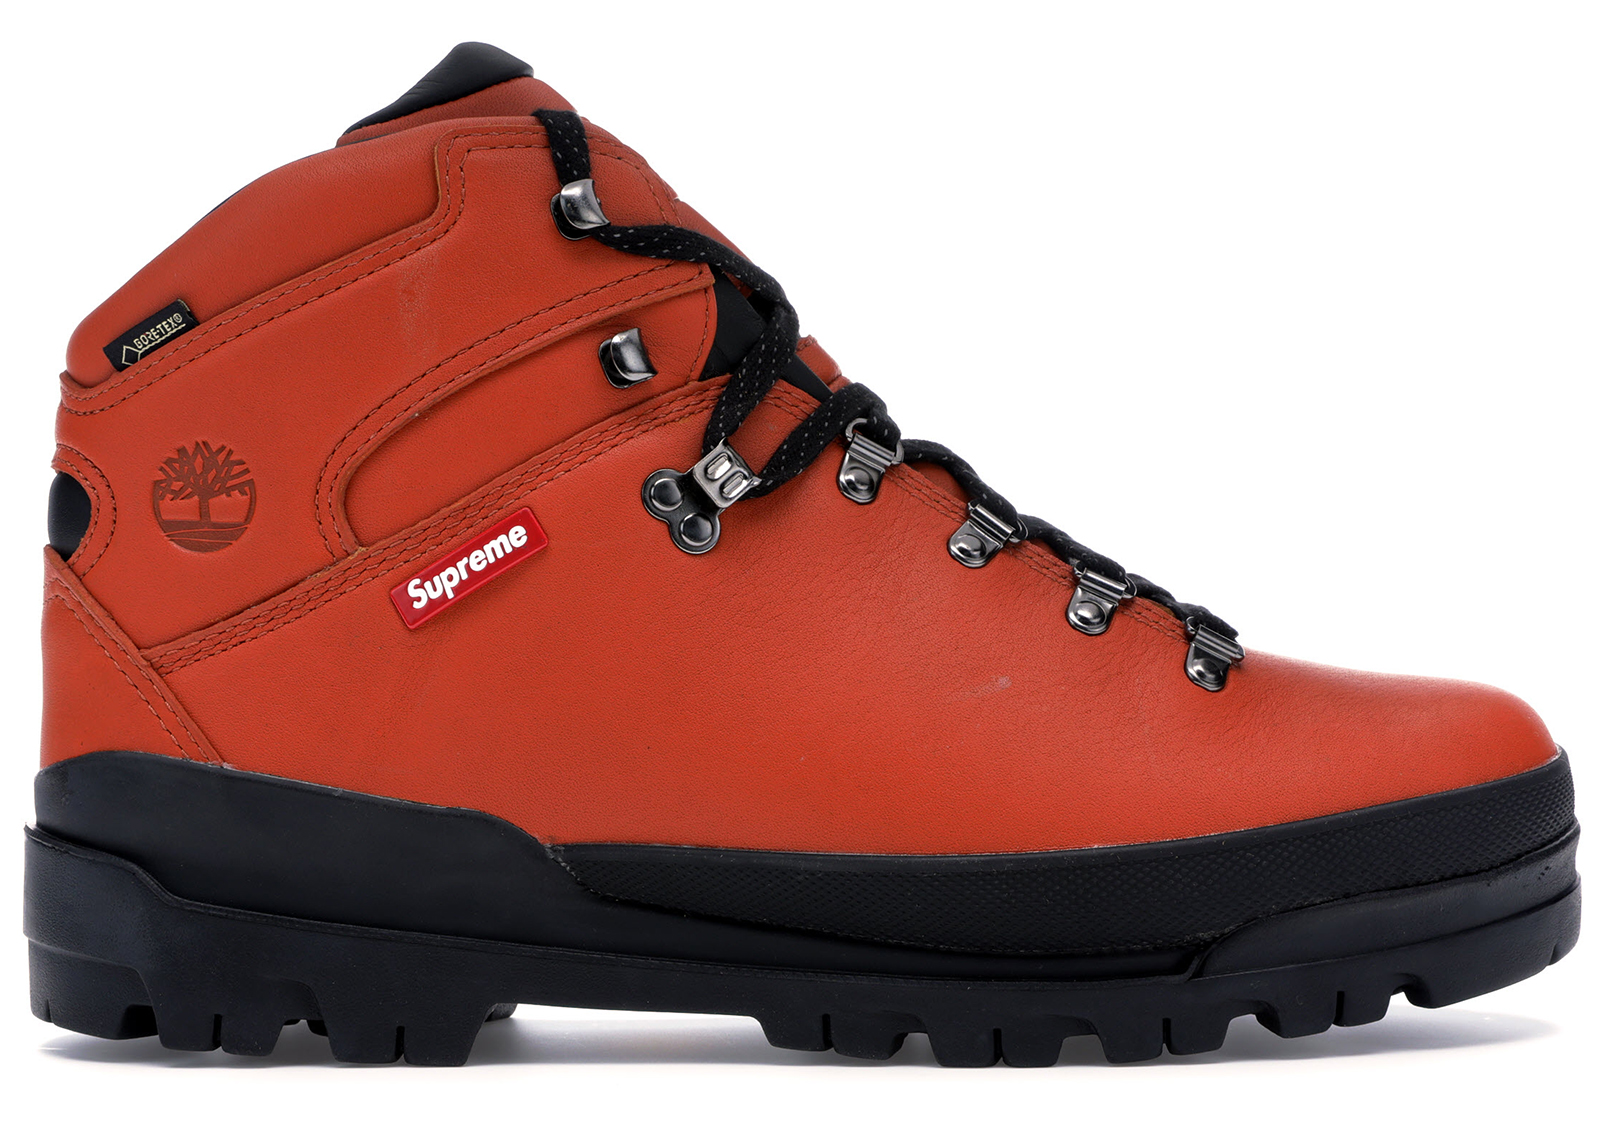 Timberland World Hiker Front Country Boot Supreme Orange